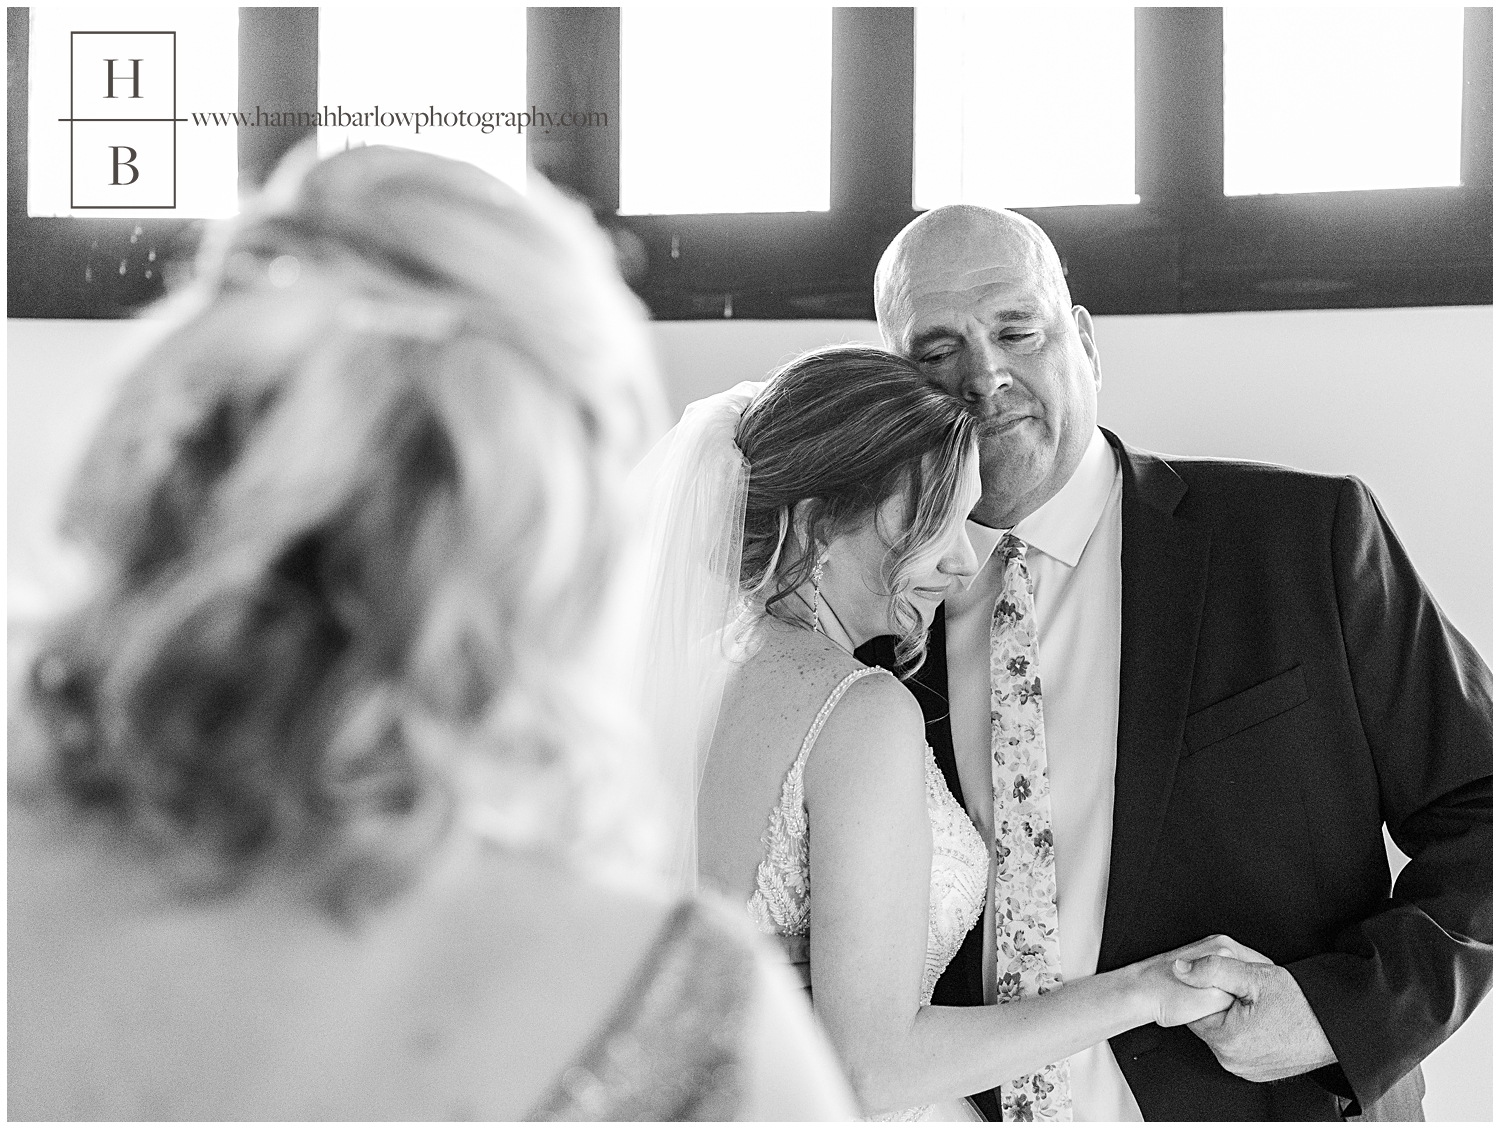 Dad embracing daughter on wedding day with mom standing in foreground.